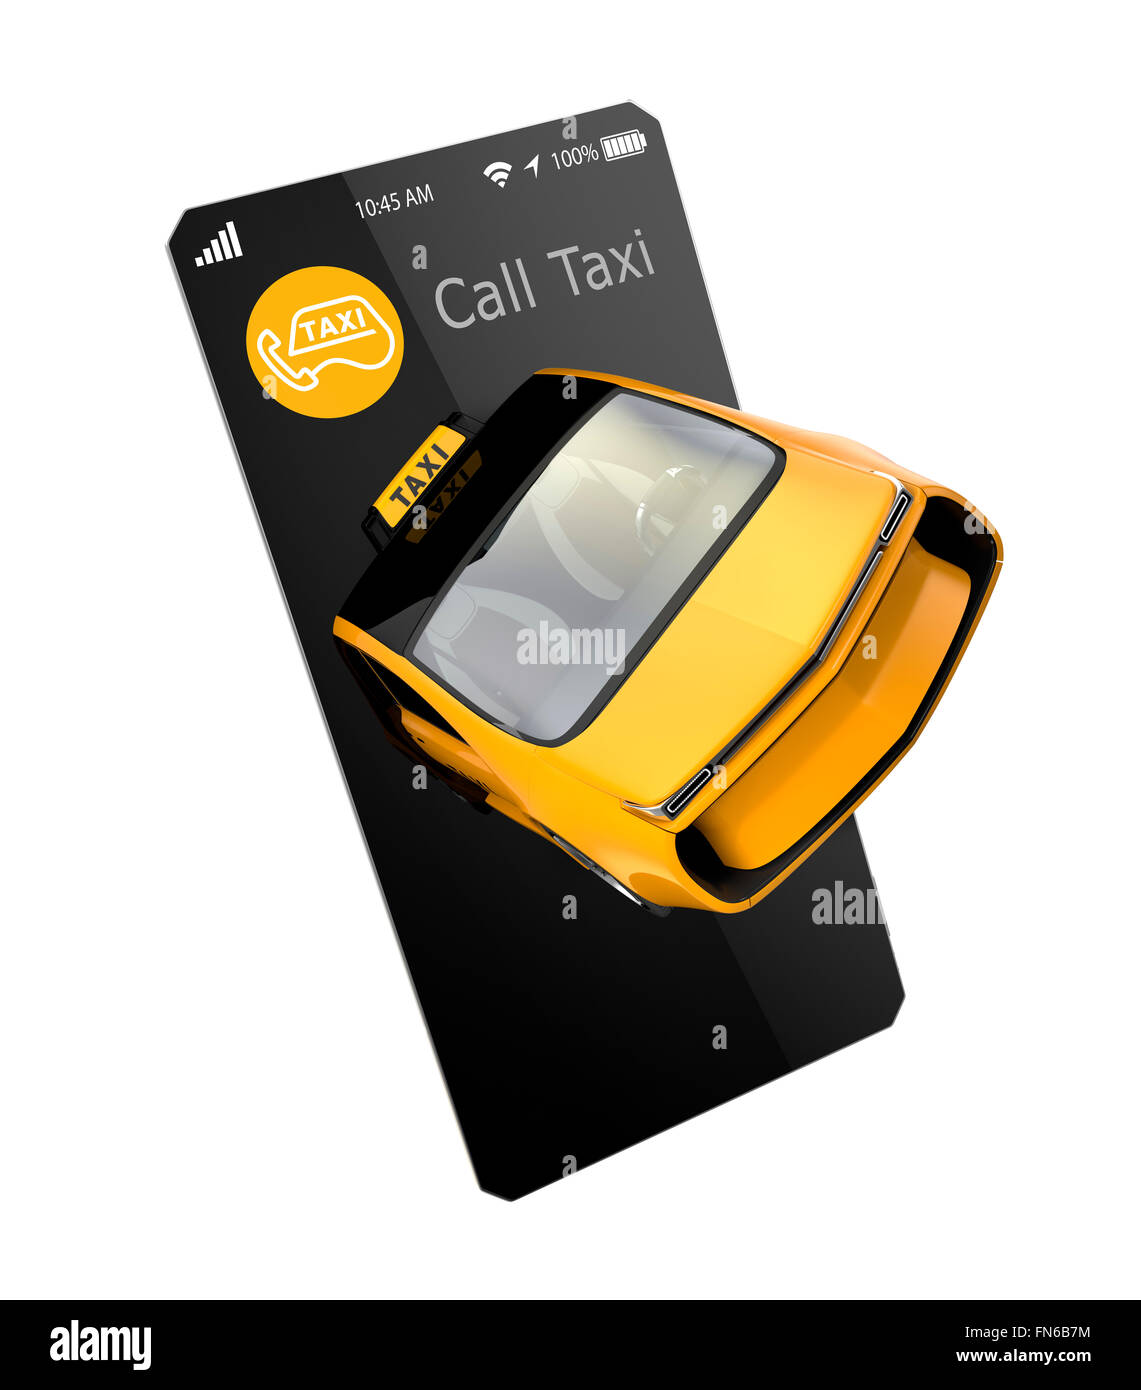 Yellow electric taxi on smart phone. Concept for mobile taxi order service. Stock Photo